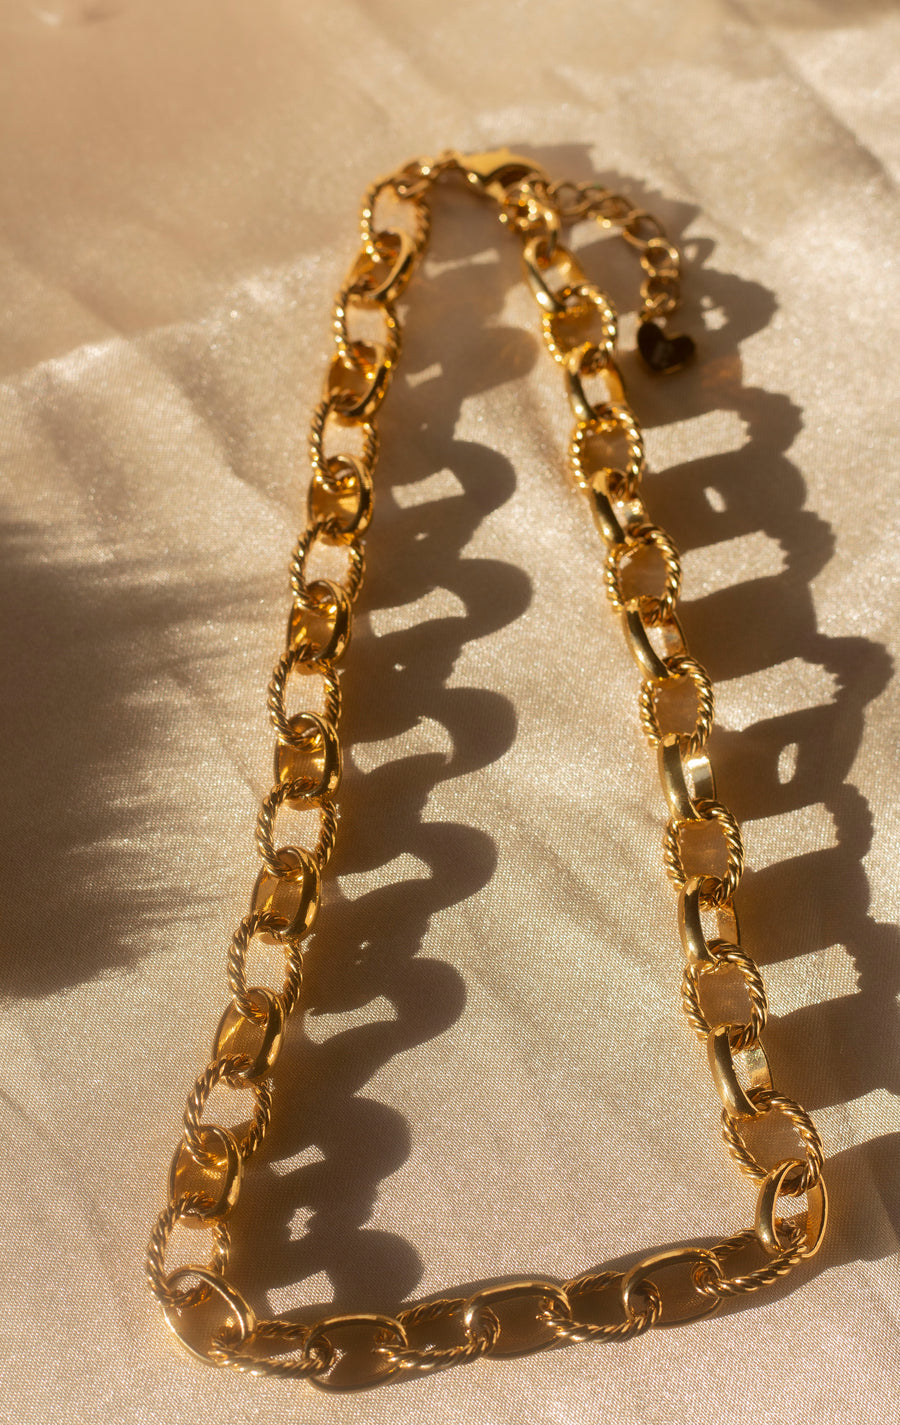 18k gold chain necklace with a rope pattern. The chain is placed on a beige cloth. Rope Link Signature Chain by E's Element.